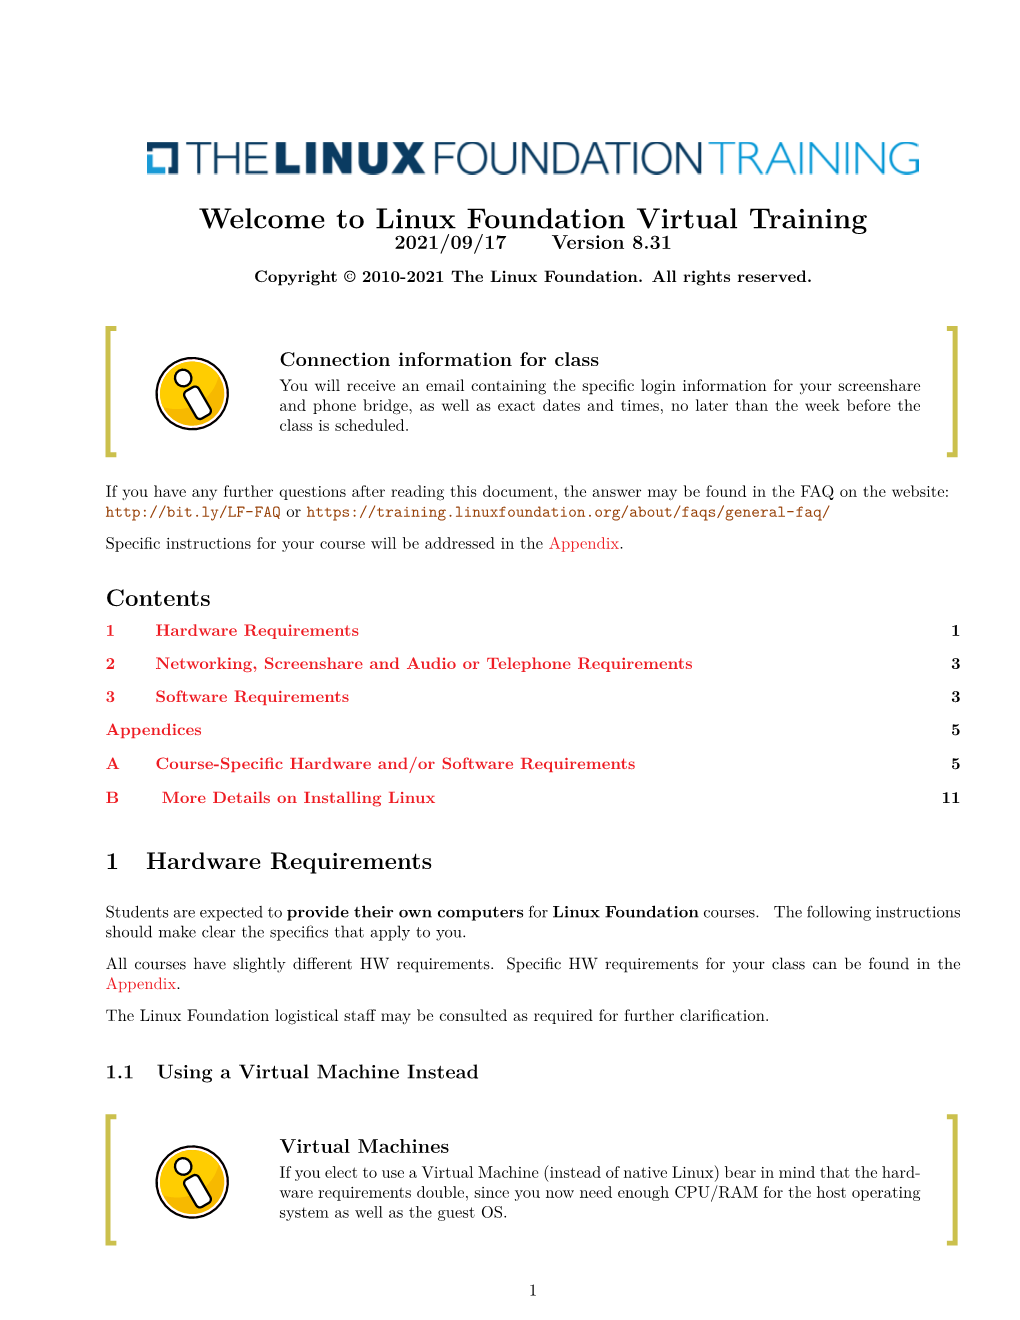 Welcome to Linux Foundation Virtual Training 2021/09/17 Version 8.31 Copyright © 2010-2021 the Linux Foundation